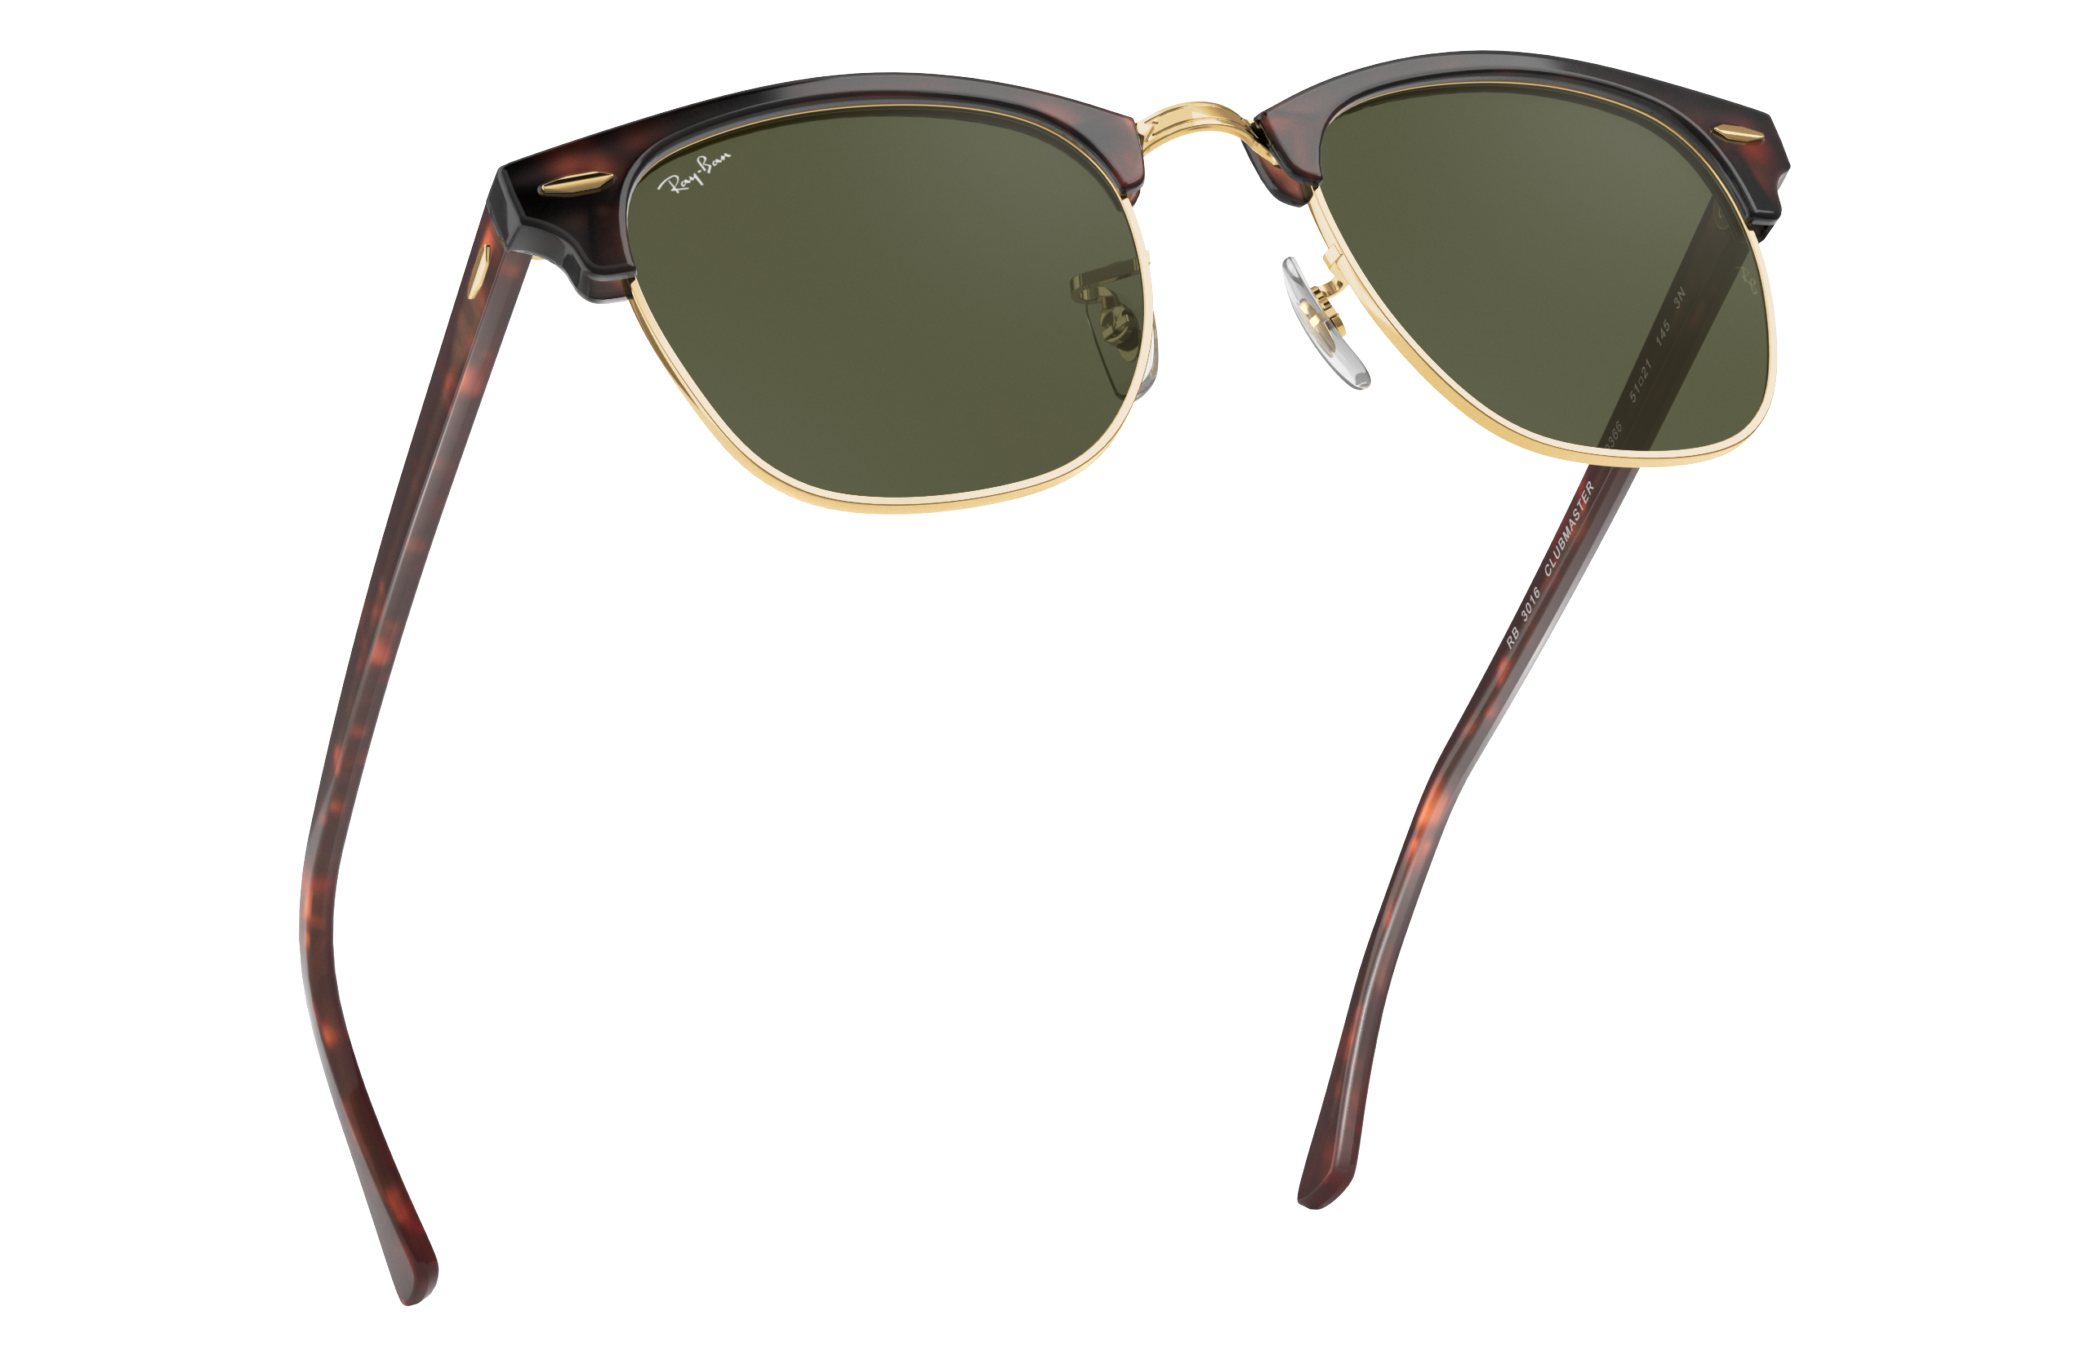 Difference between Ray-Ban Clubmaster RB3016 and RB2156 - YouTube